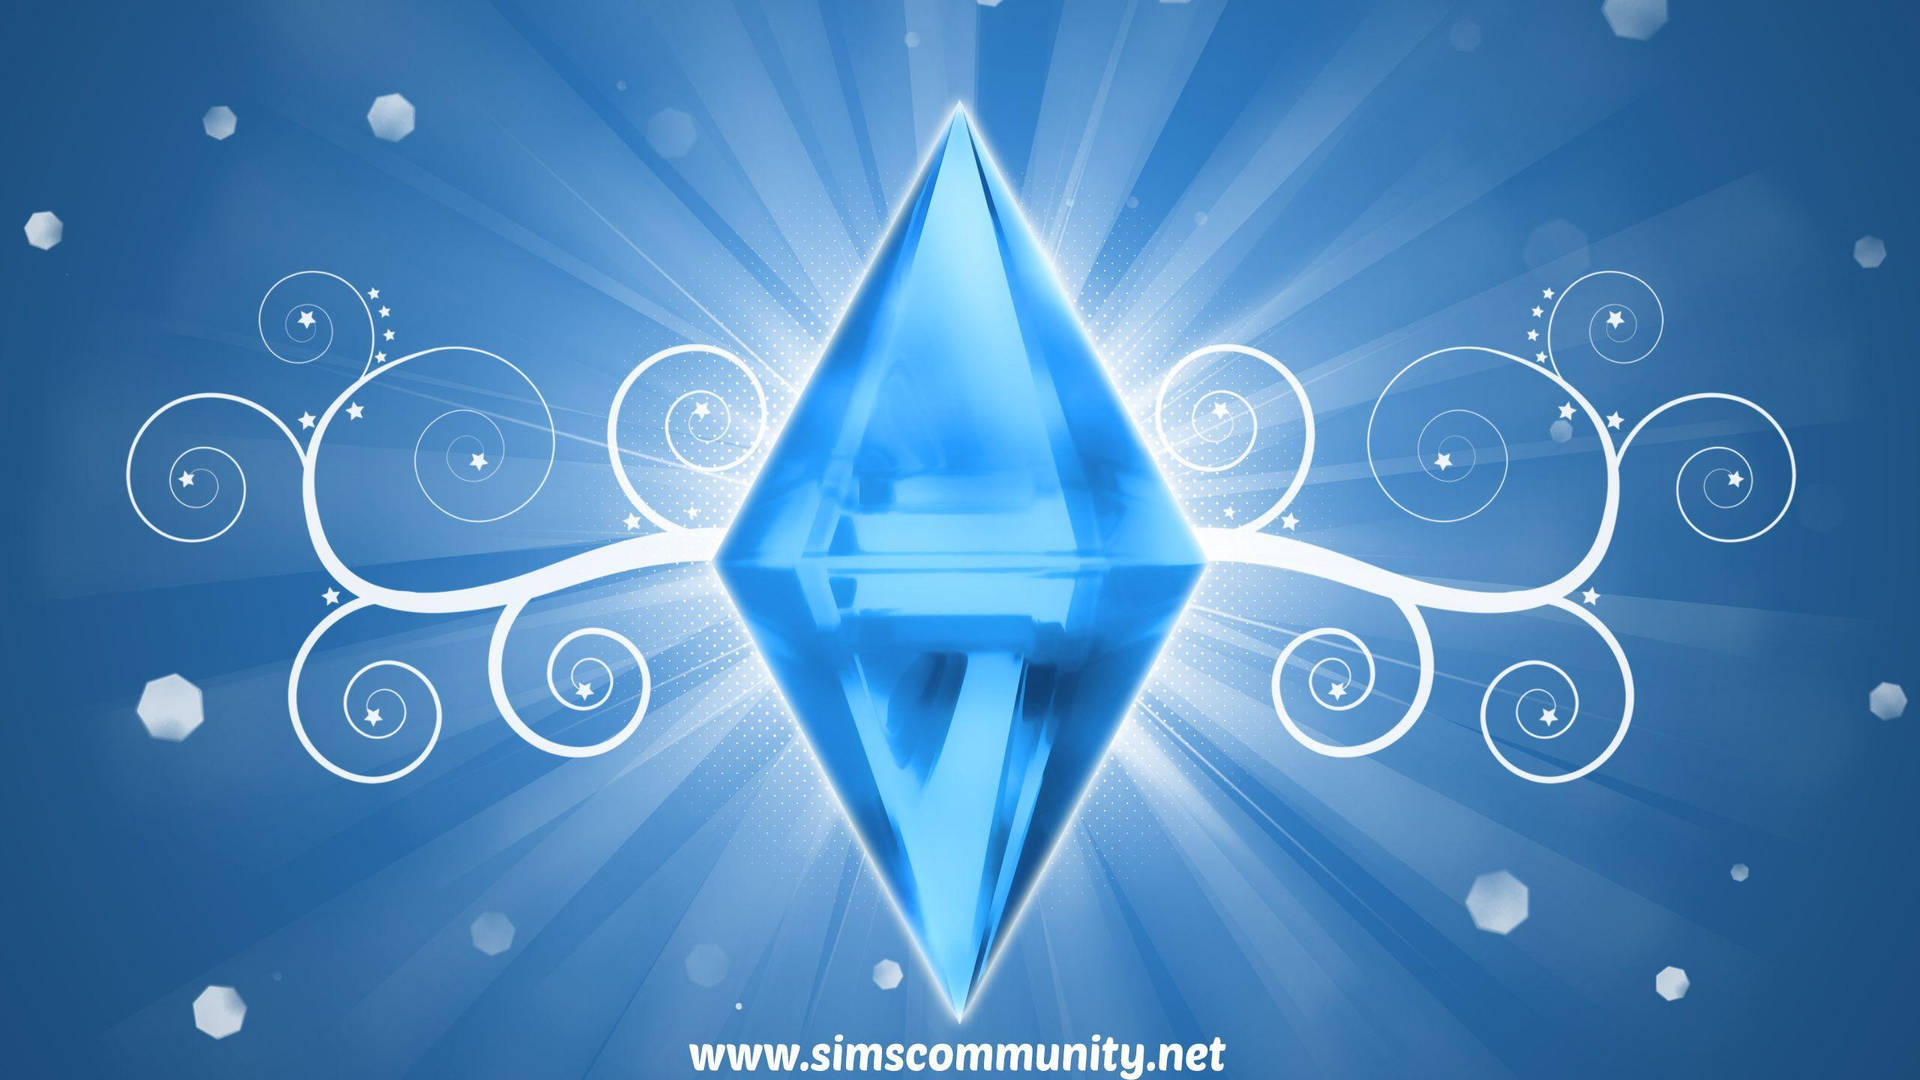 The Sims 2560 X 1440 Wallpaper